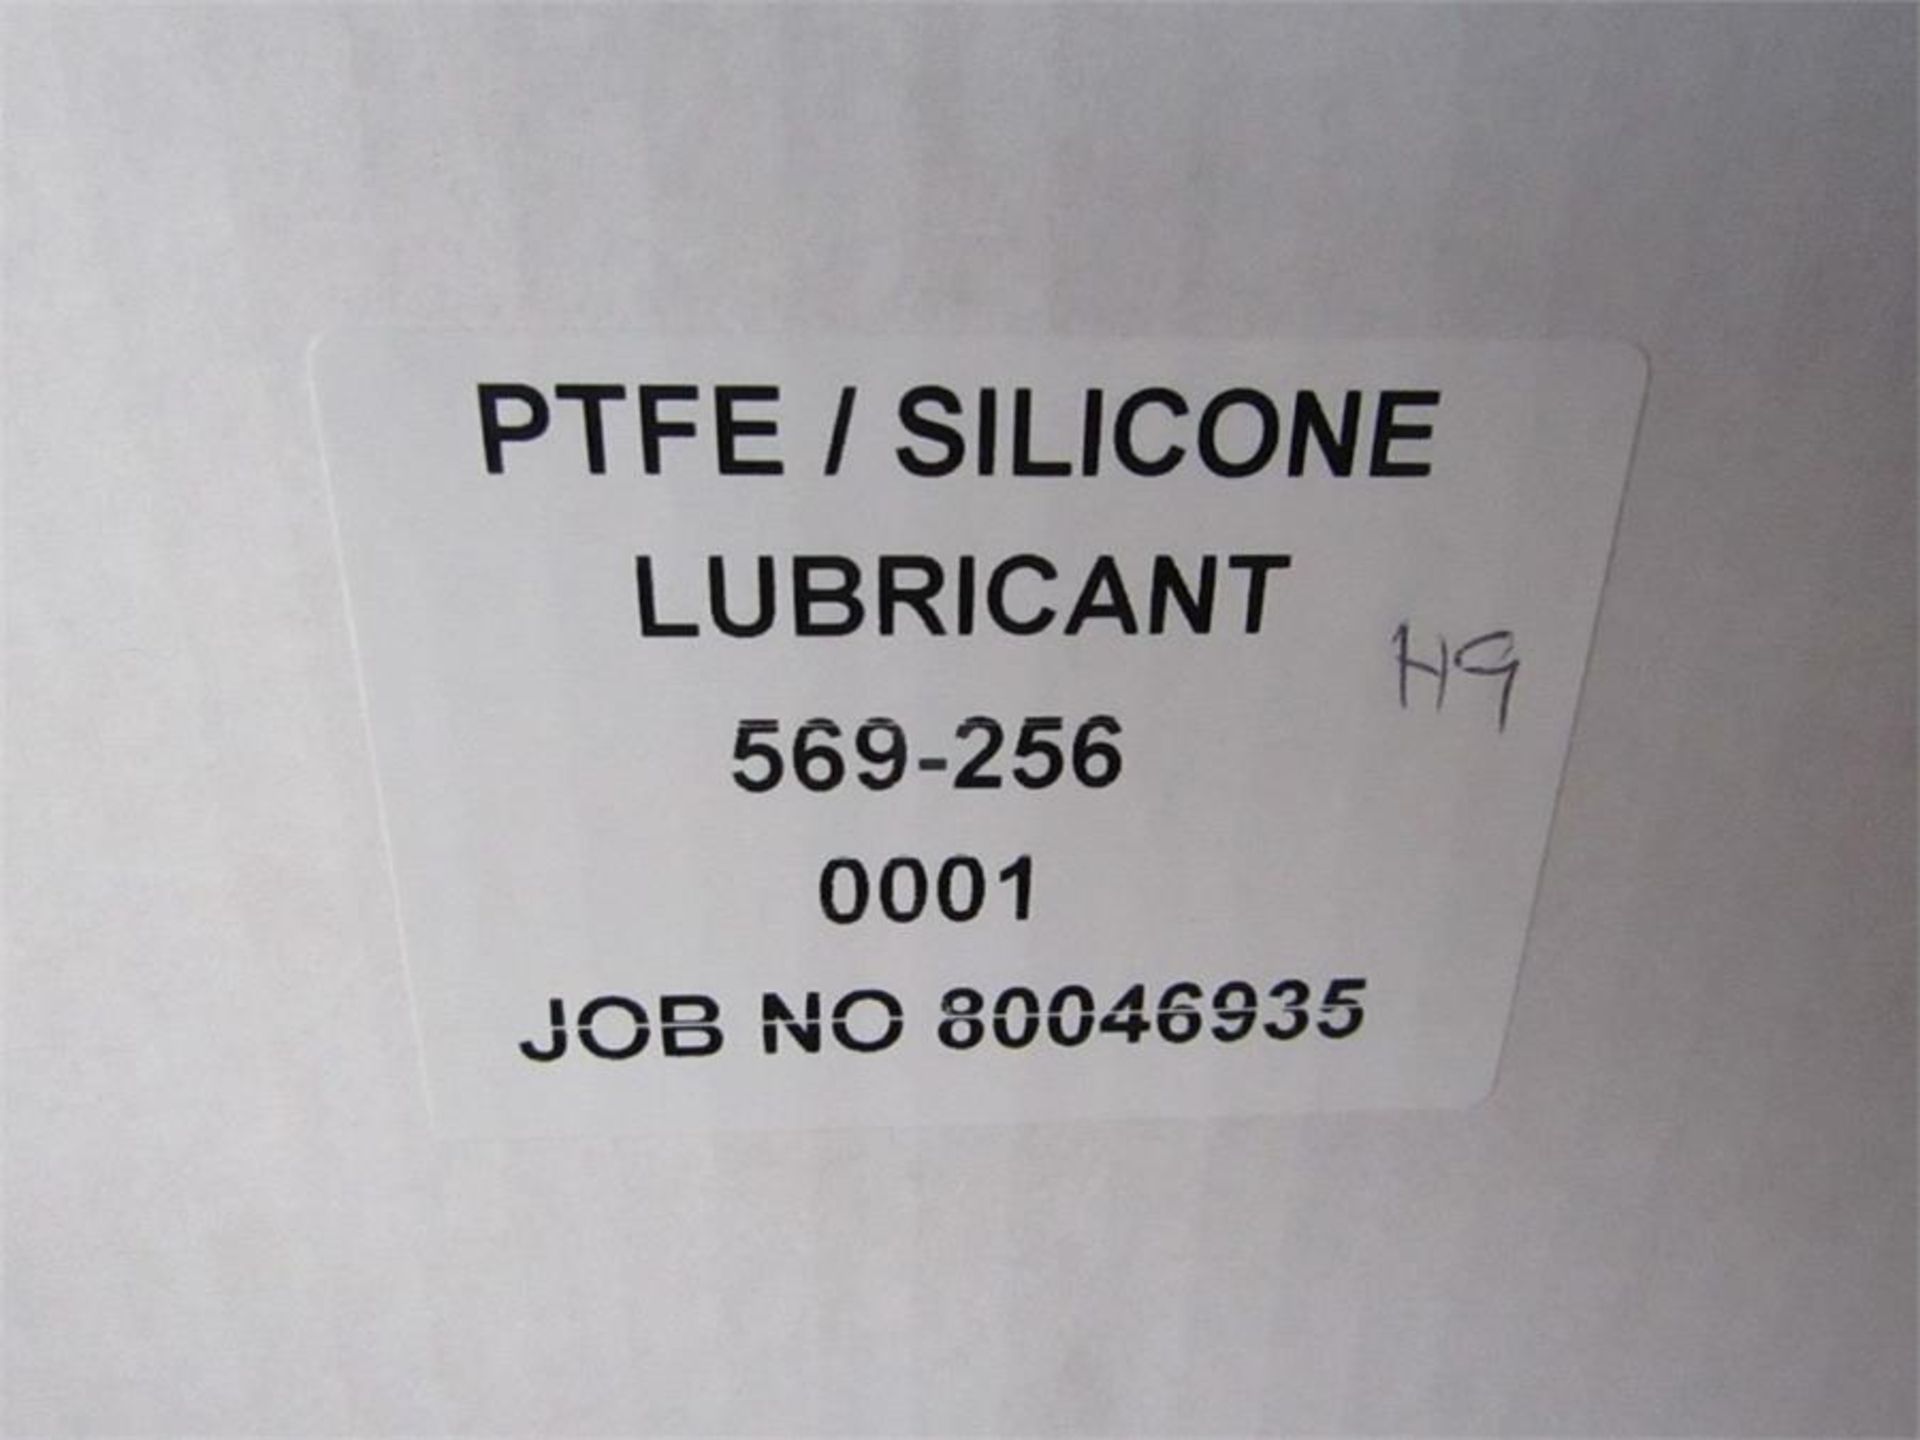 12 x 400ml Aerosol Cans of PTFE Silicone Lubricant - H9 569256 - Image 3 of 3